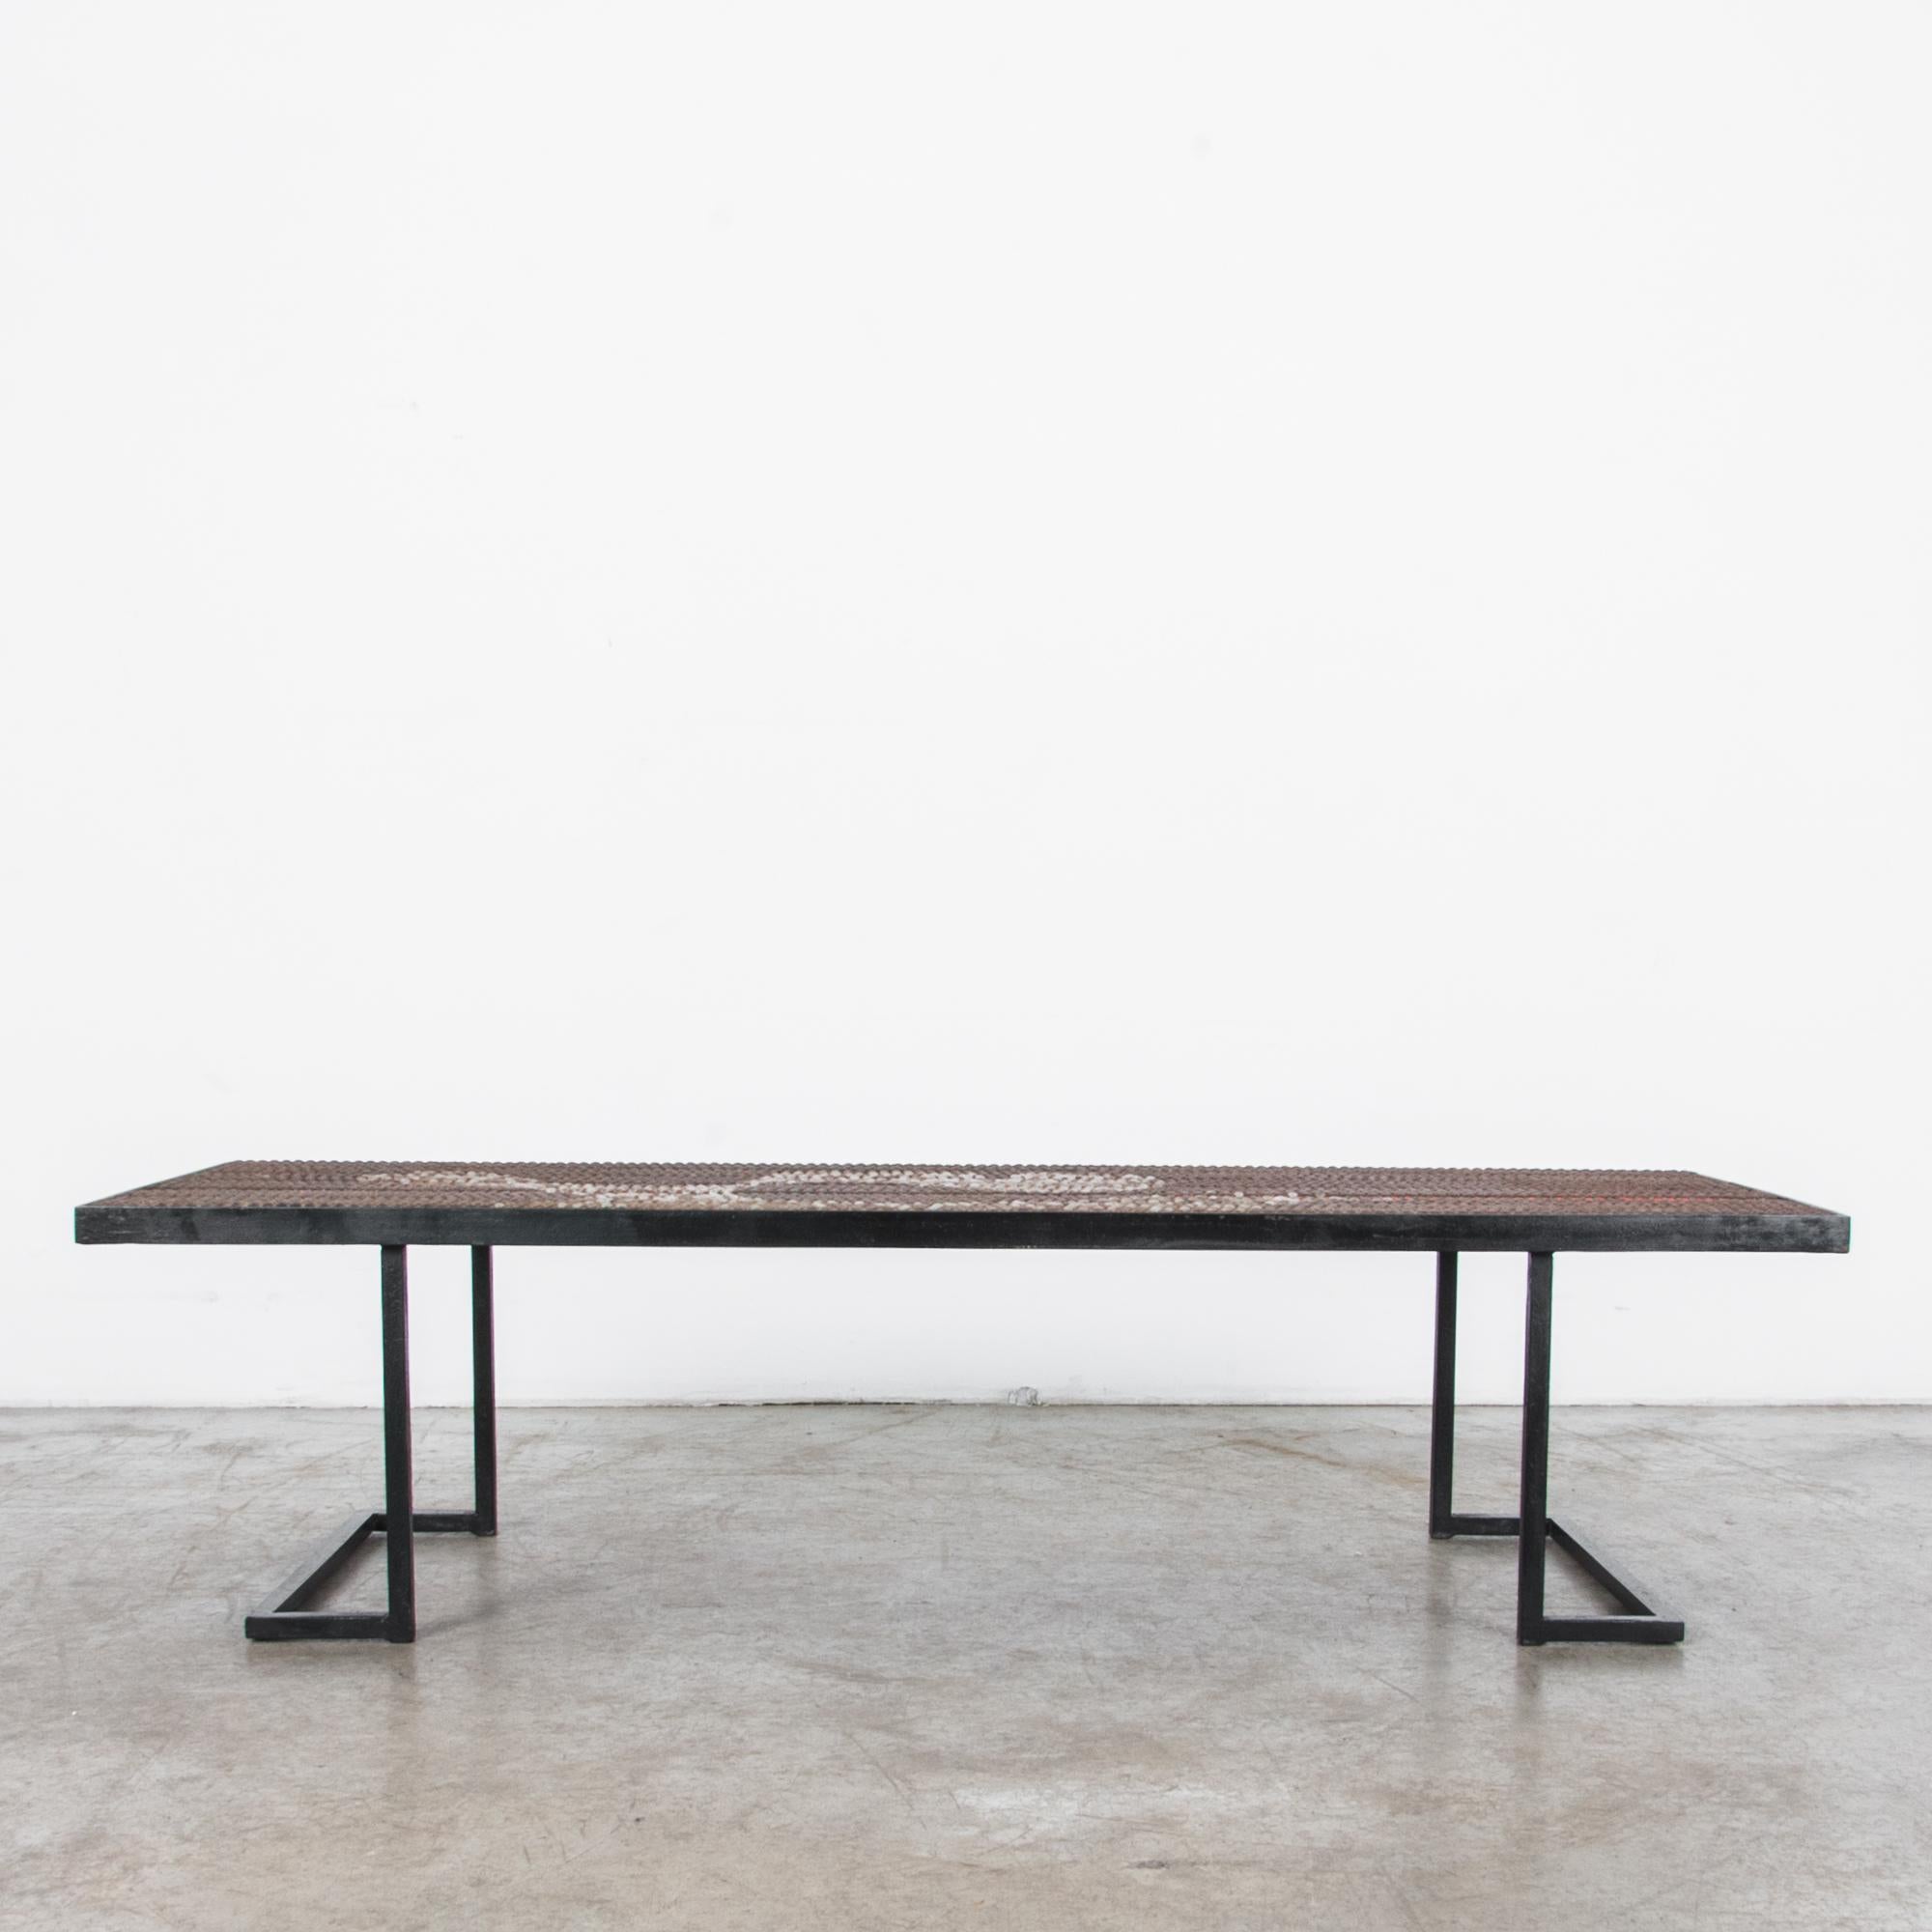 A rare 1960s table from Europe, featuring a geometric metal frame and an original tabletop design. Raised metal pins on the surface of the tabletop coalesce into a flowing, abstract pattern, punctuated by lines of red paint, while the black metal